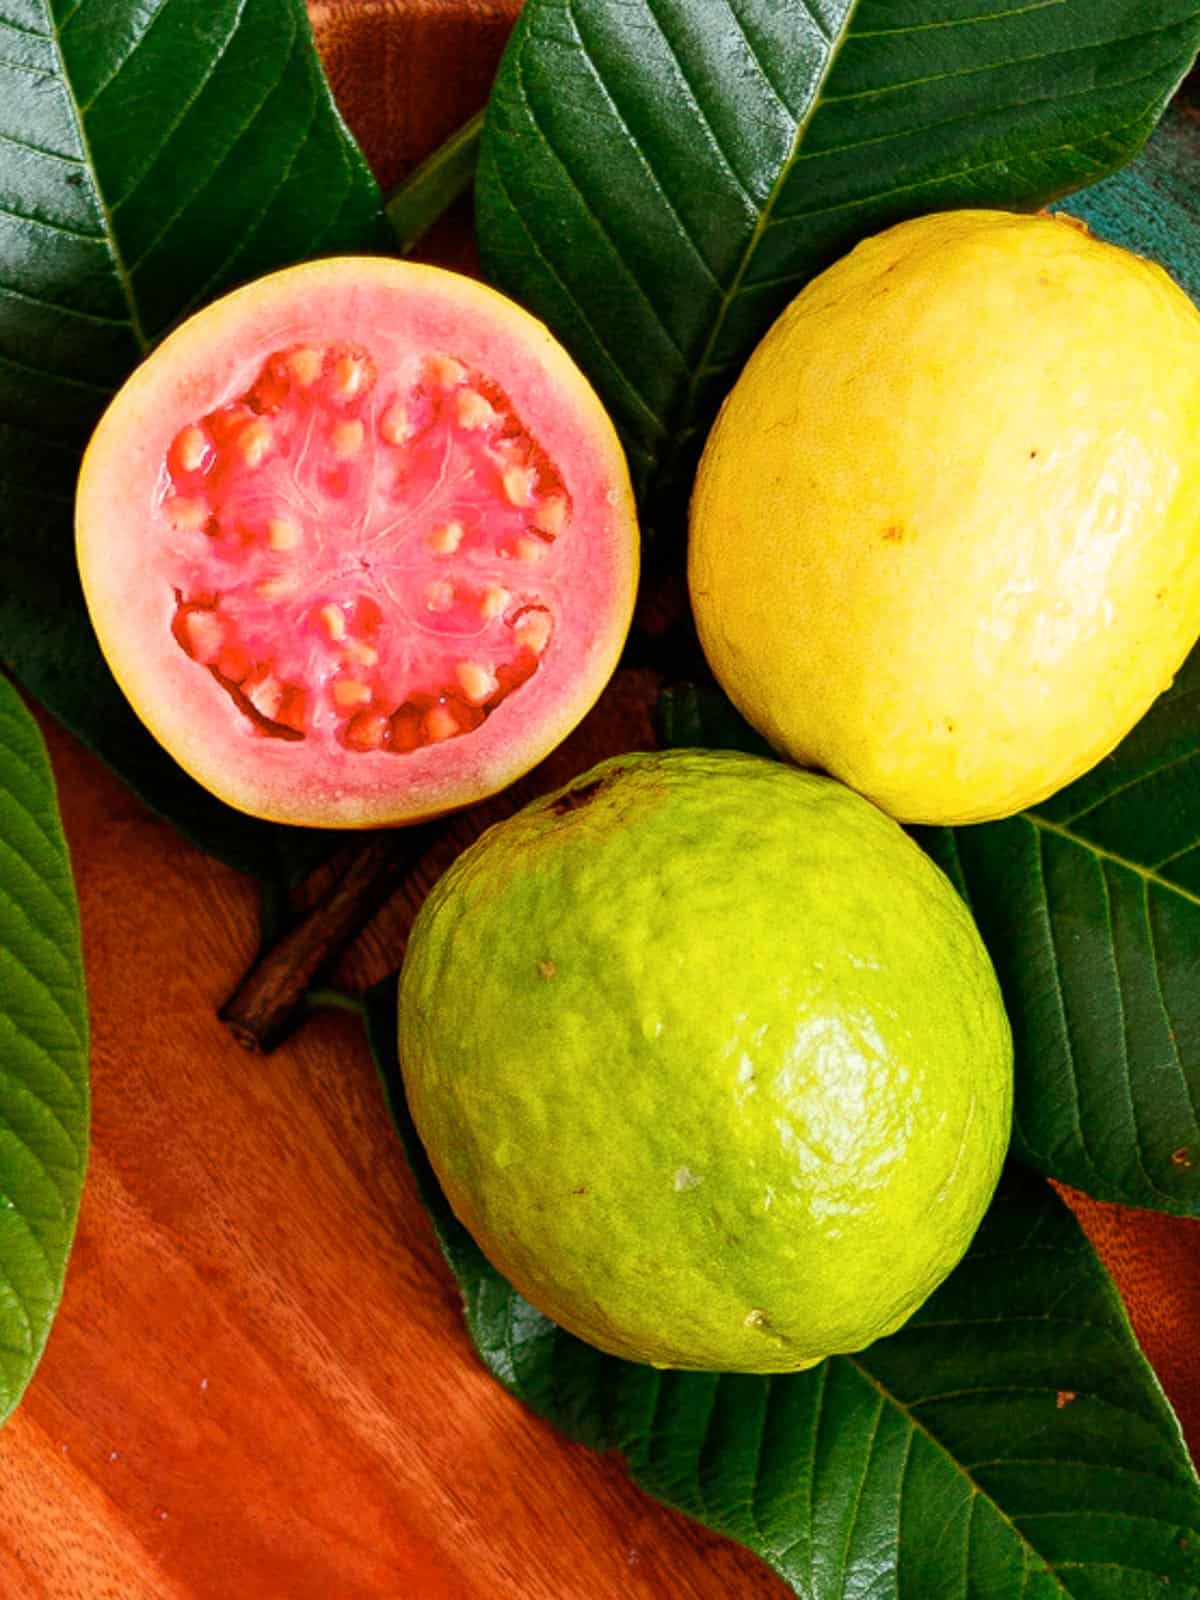 Ripe and unripe guava shown with cross section of pink fruit.